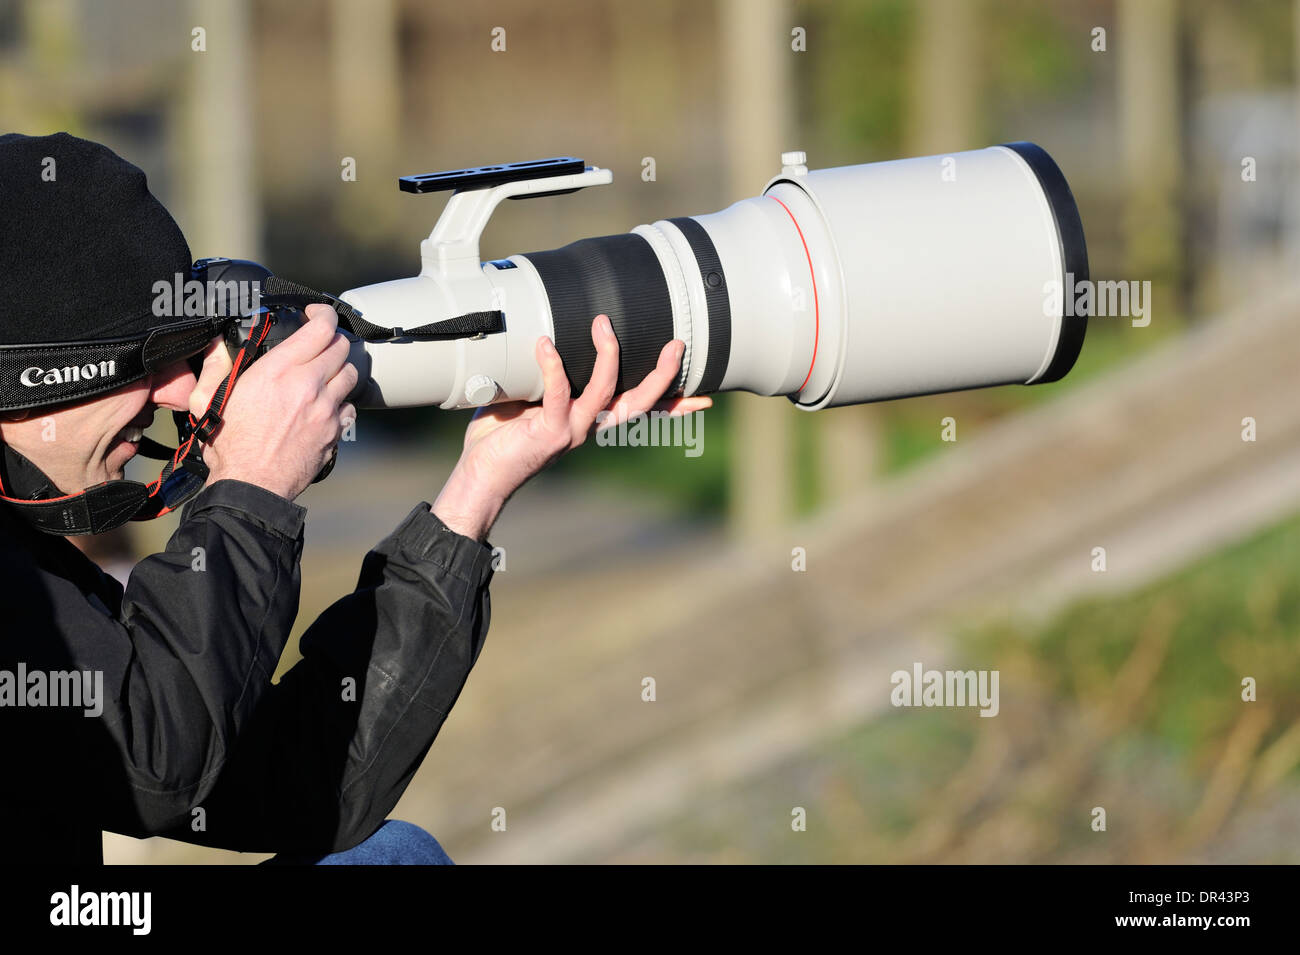 A young male using a modern digital slr camera and canon 600 mm f4 lens for capturing wildlife photographs Stock Photo